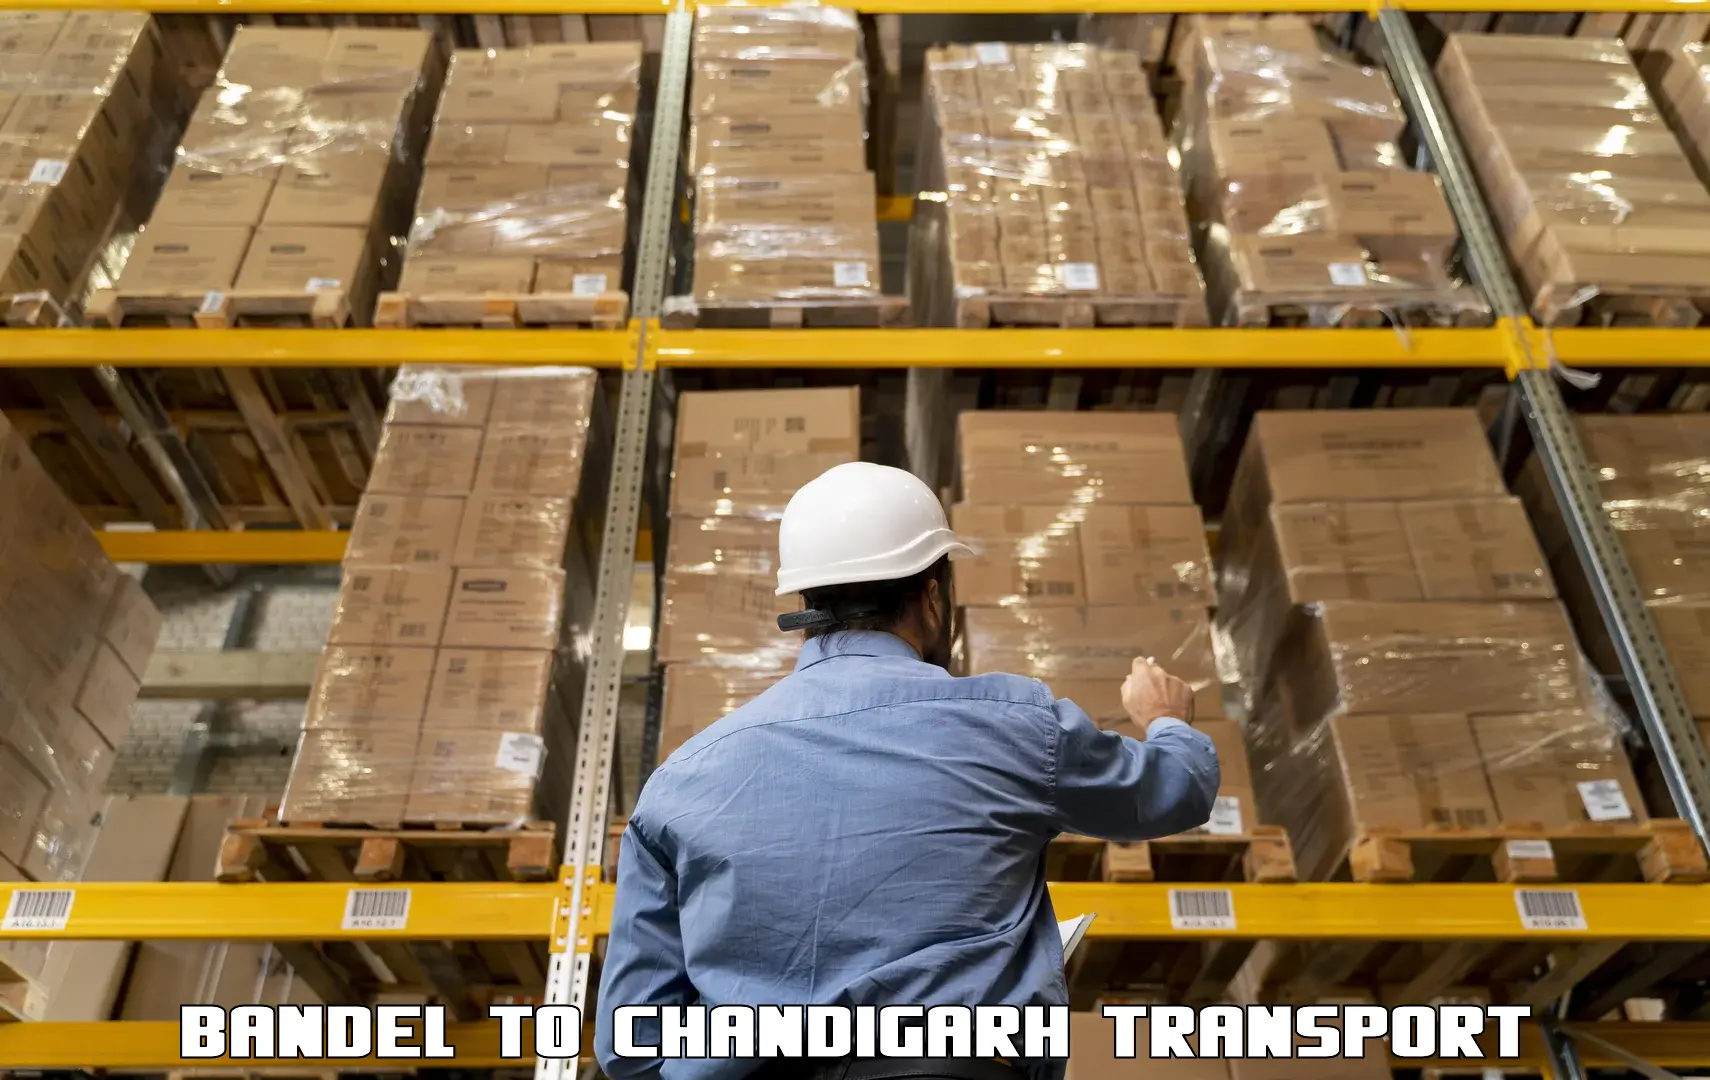 Express transport services Bandel to Chandigarh